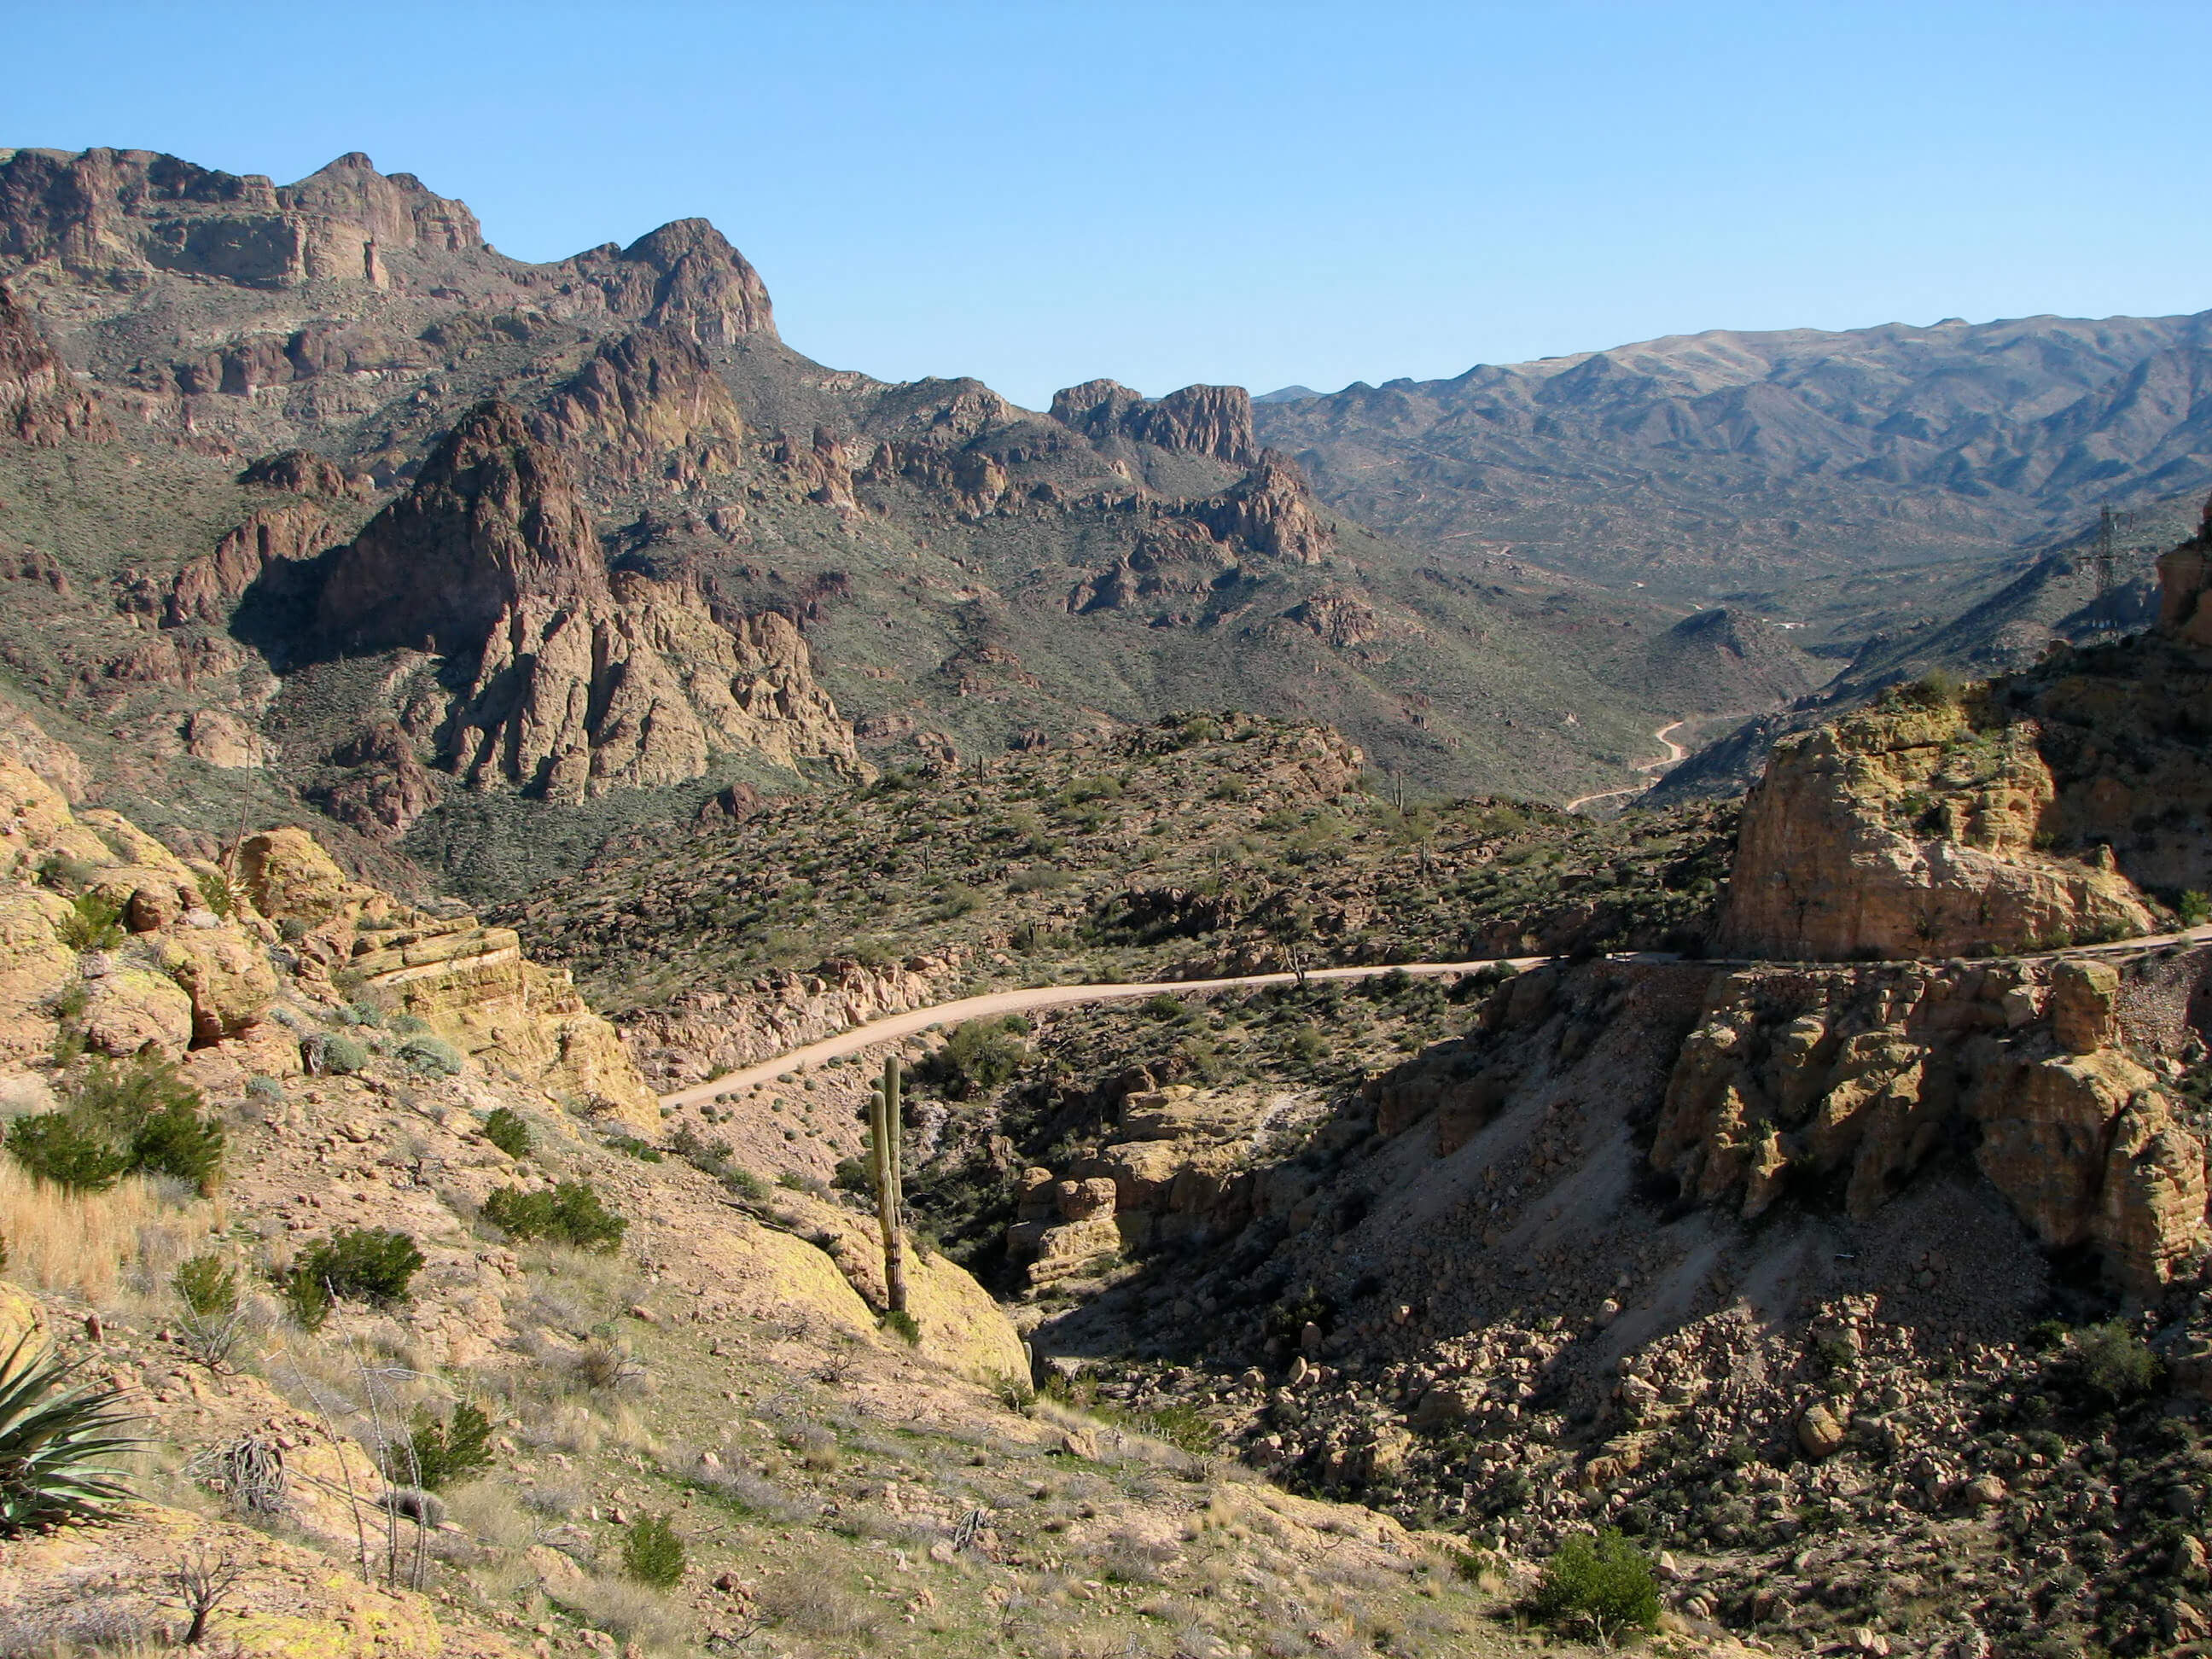 A long-distance shot of the Apache Trail, showing the high cliffs and sheer drops the road runs along.